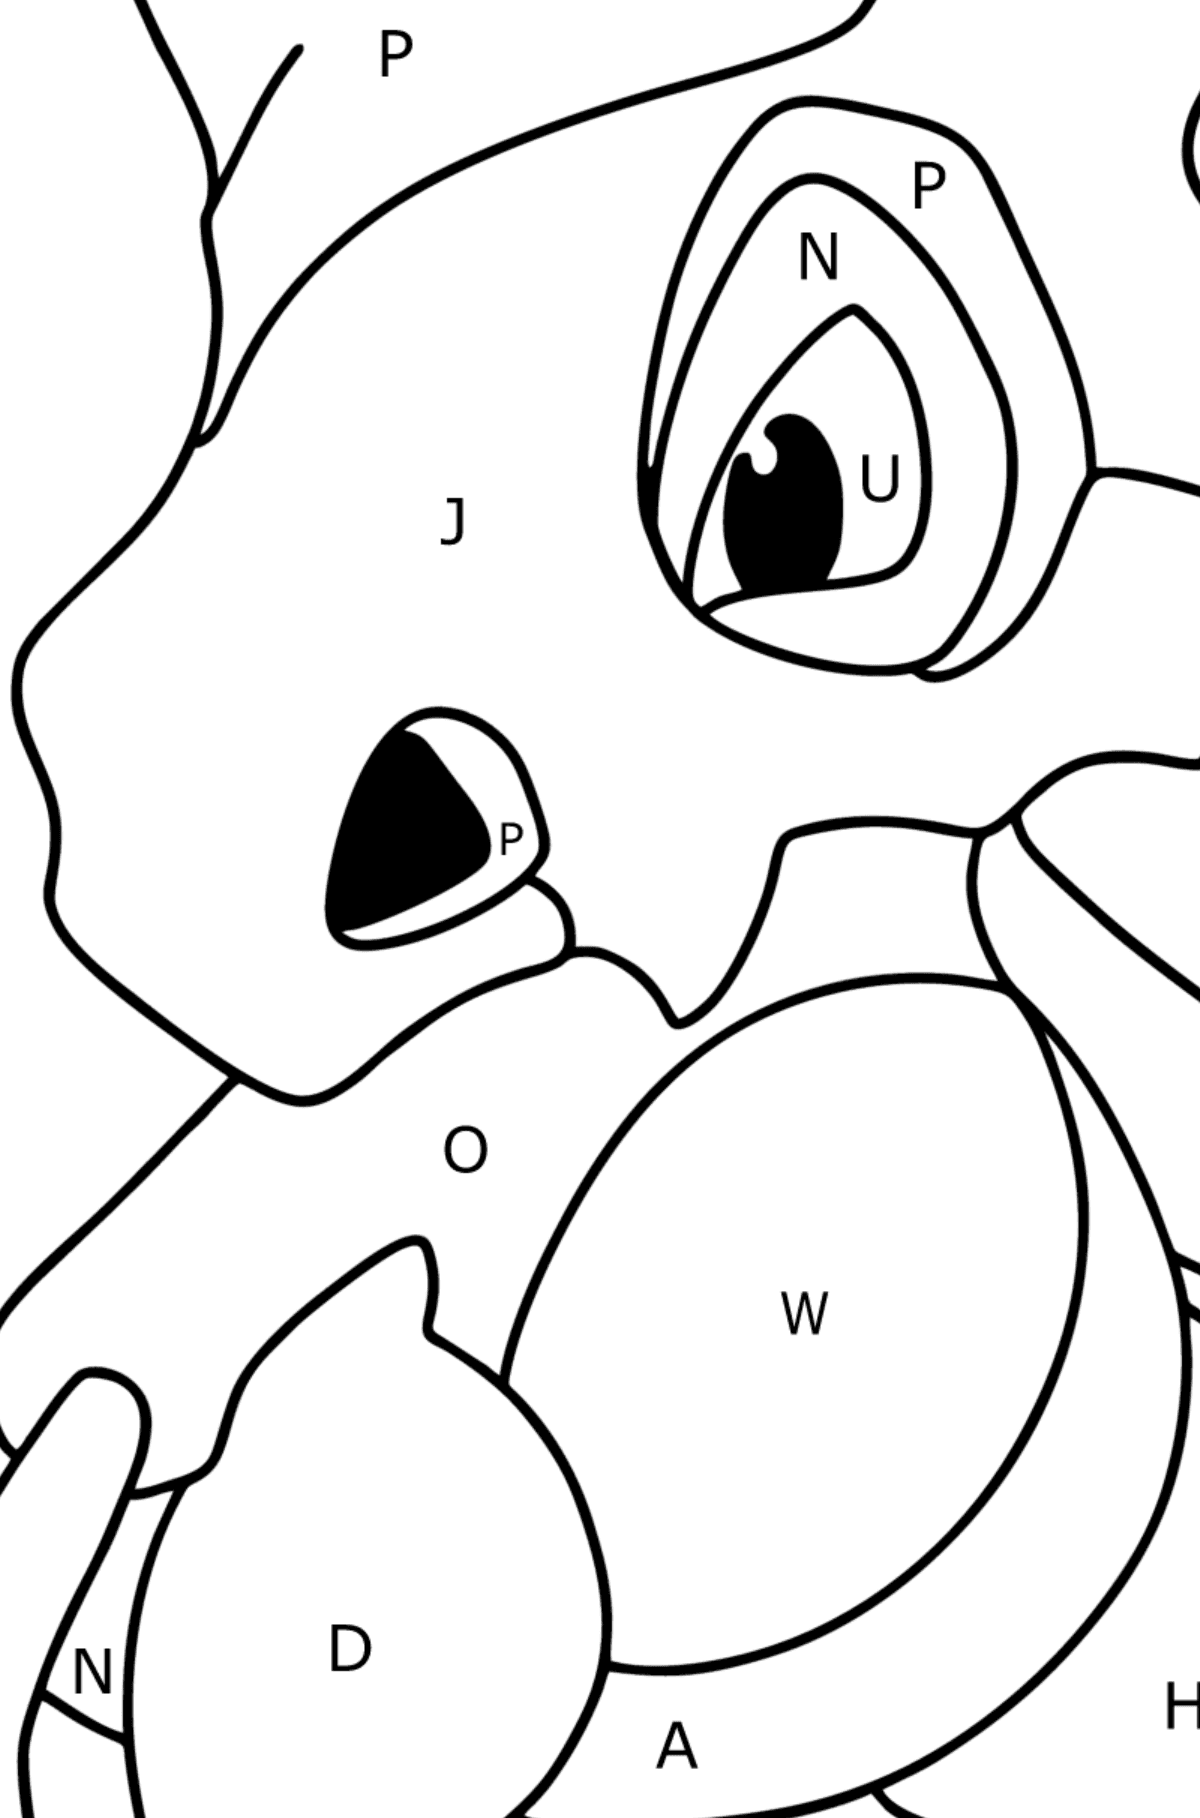 Coloring page Pokemon Go Cubone - Coloring by Letters for Kids